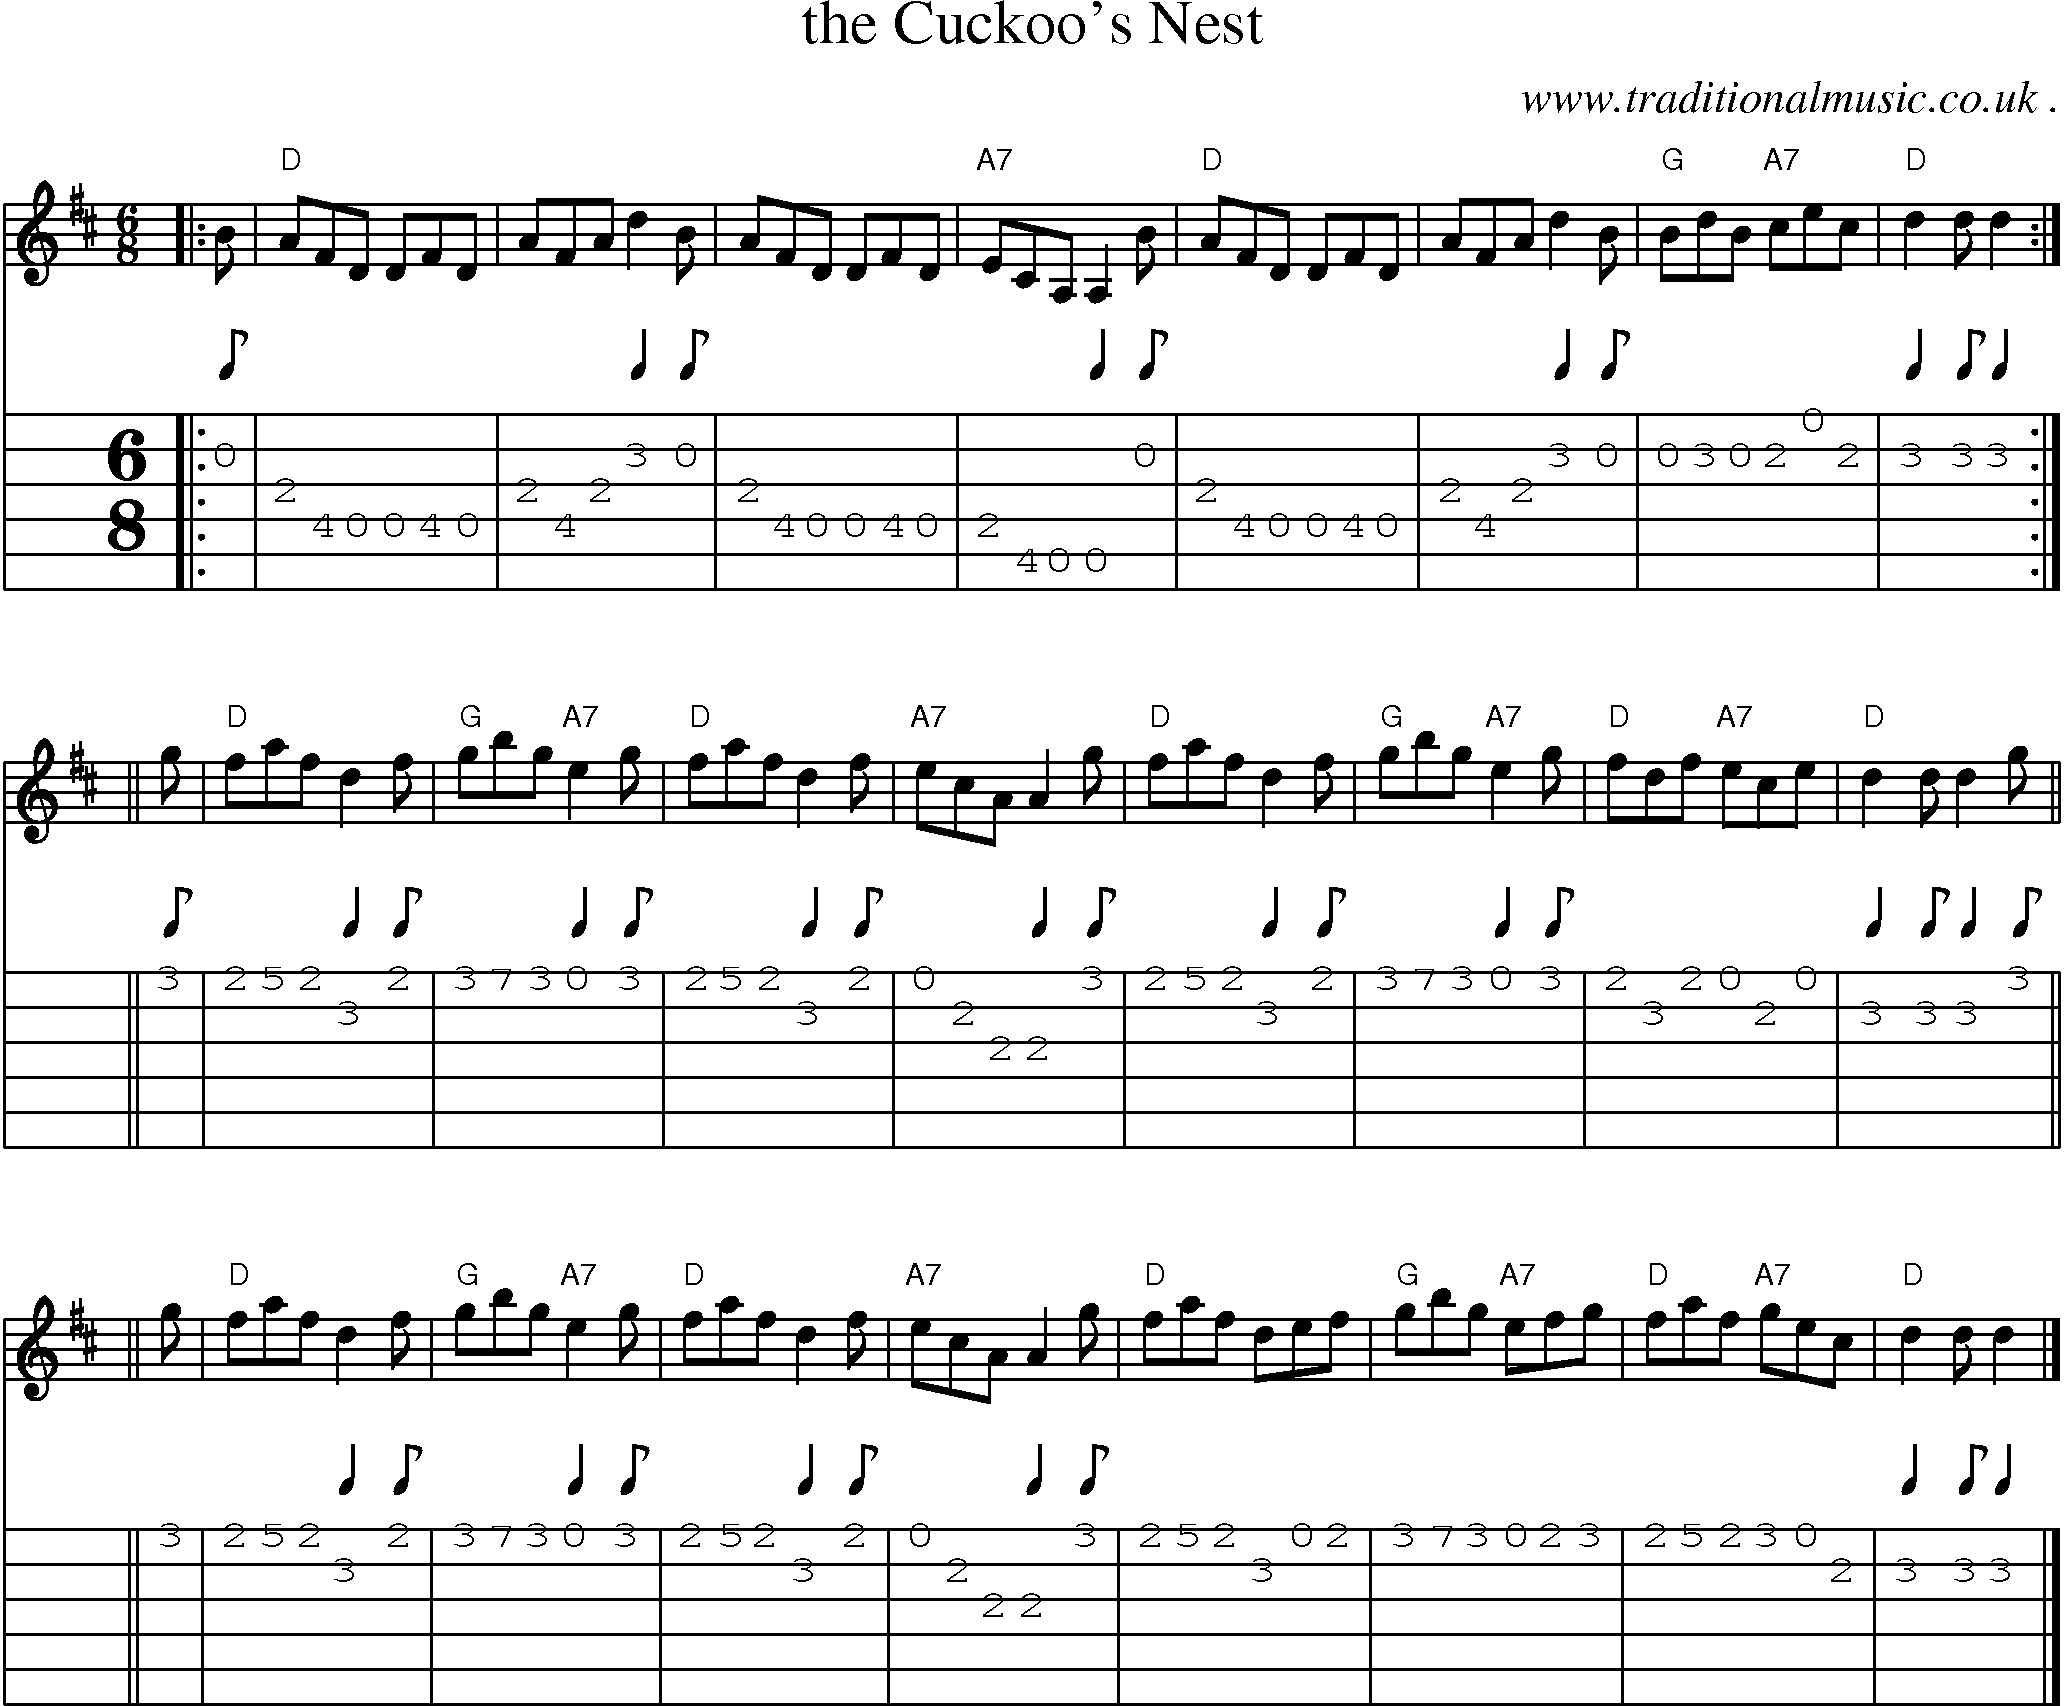 Sheet-music  score, Chords and Guitar Tabs for The Cuckoos Nest